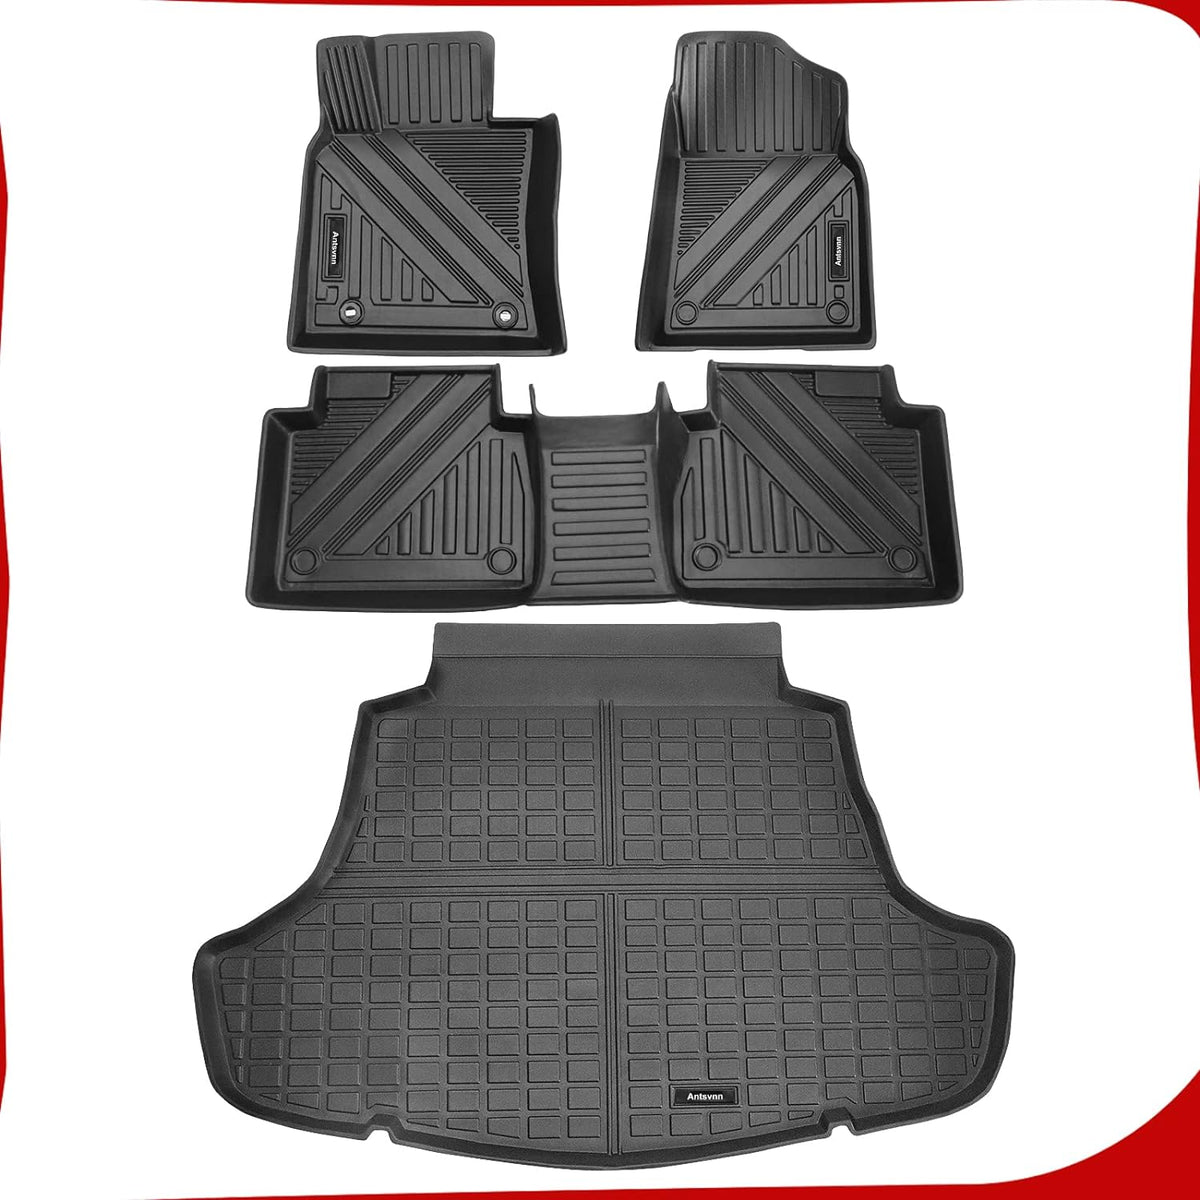 Antsvnn Floor Mats Compatible with Toyota Camry 2018 - 2024 All Weather 2 Row and Cargo Liner Rubber Floor Liners Black (FWD Only Models Only) (No Hybrid)